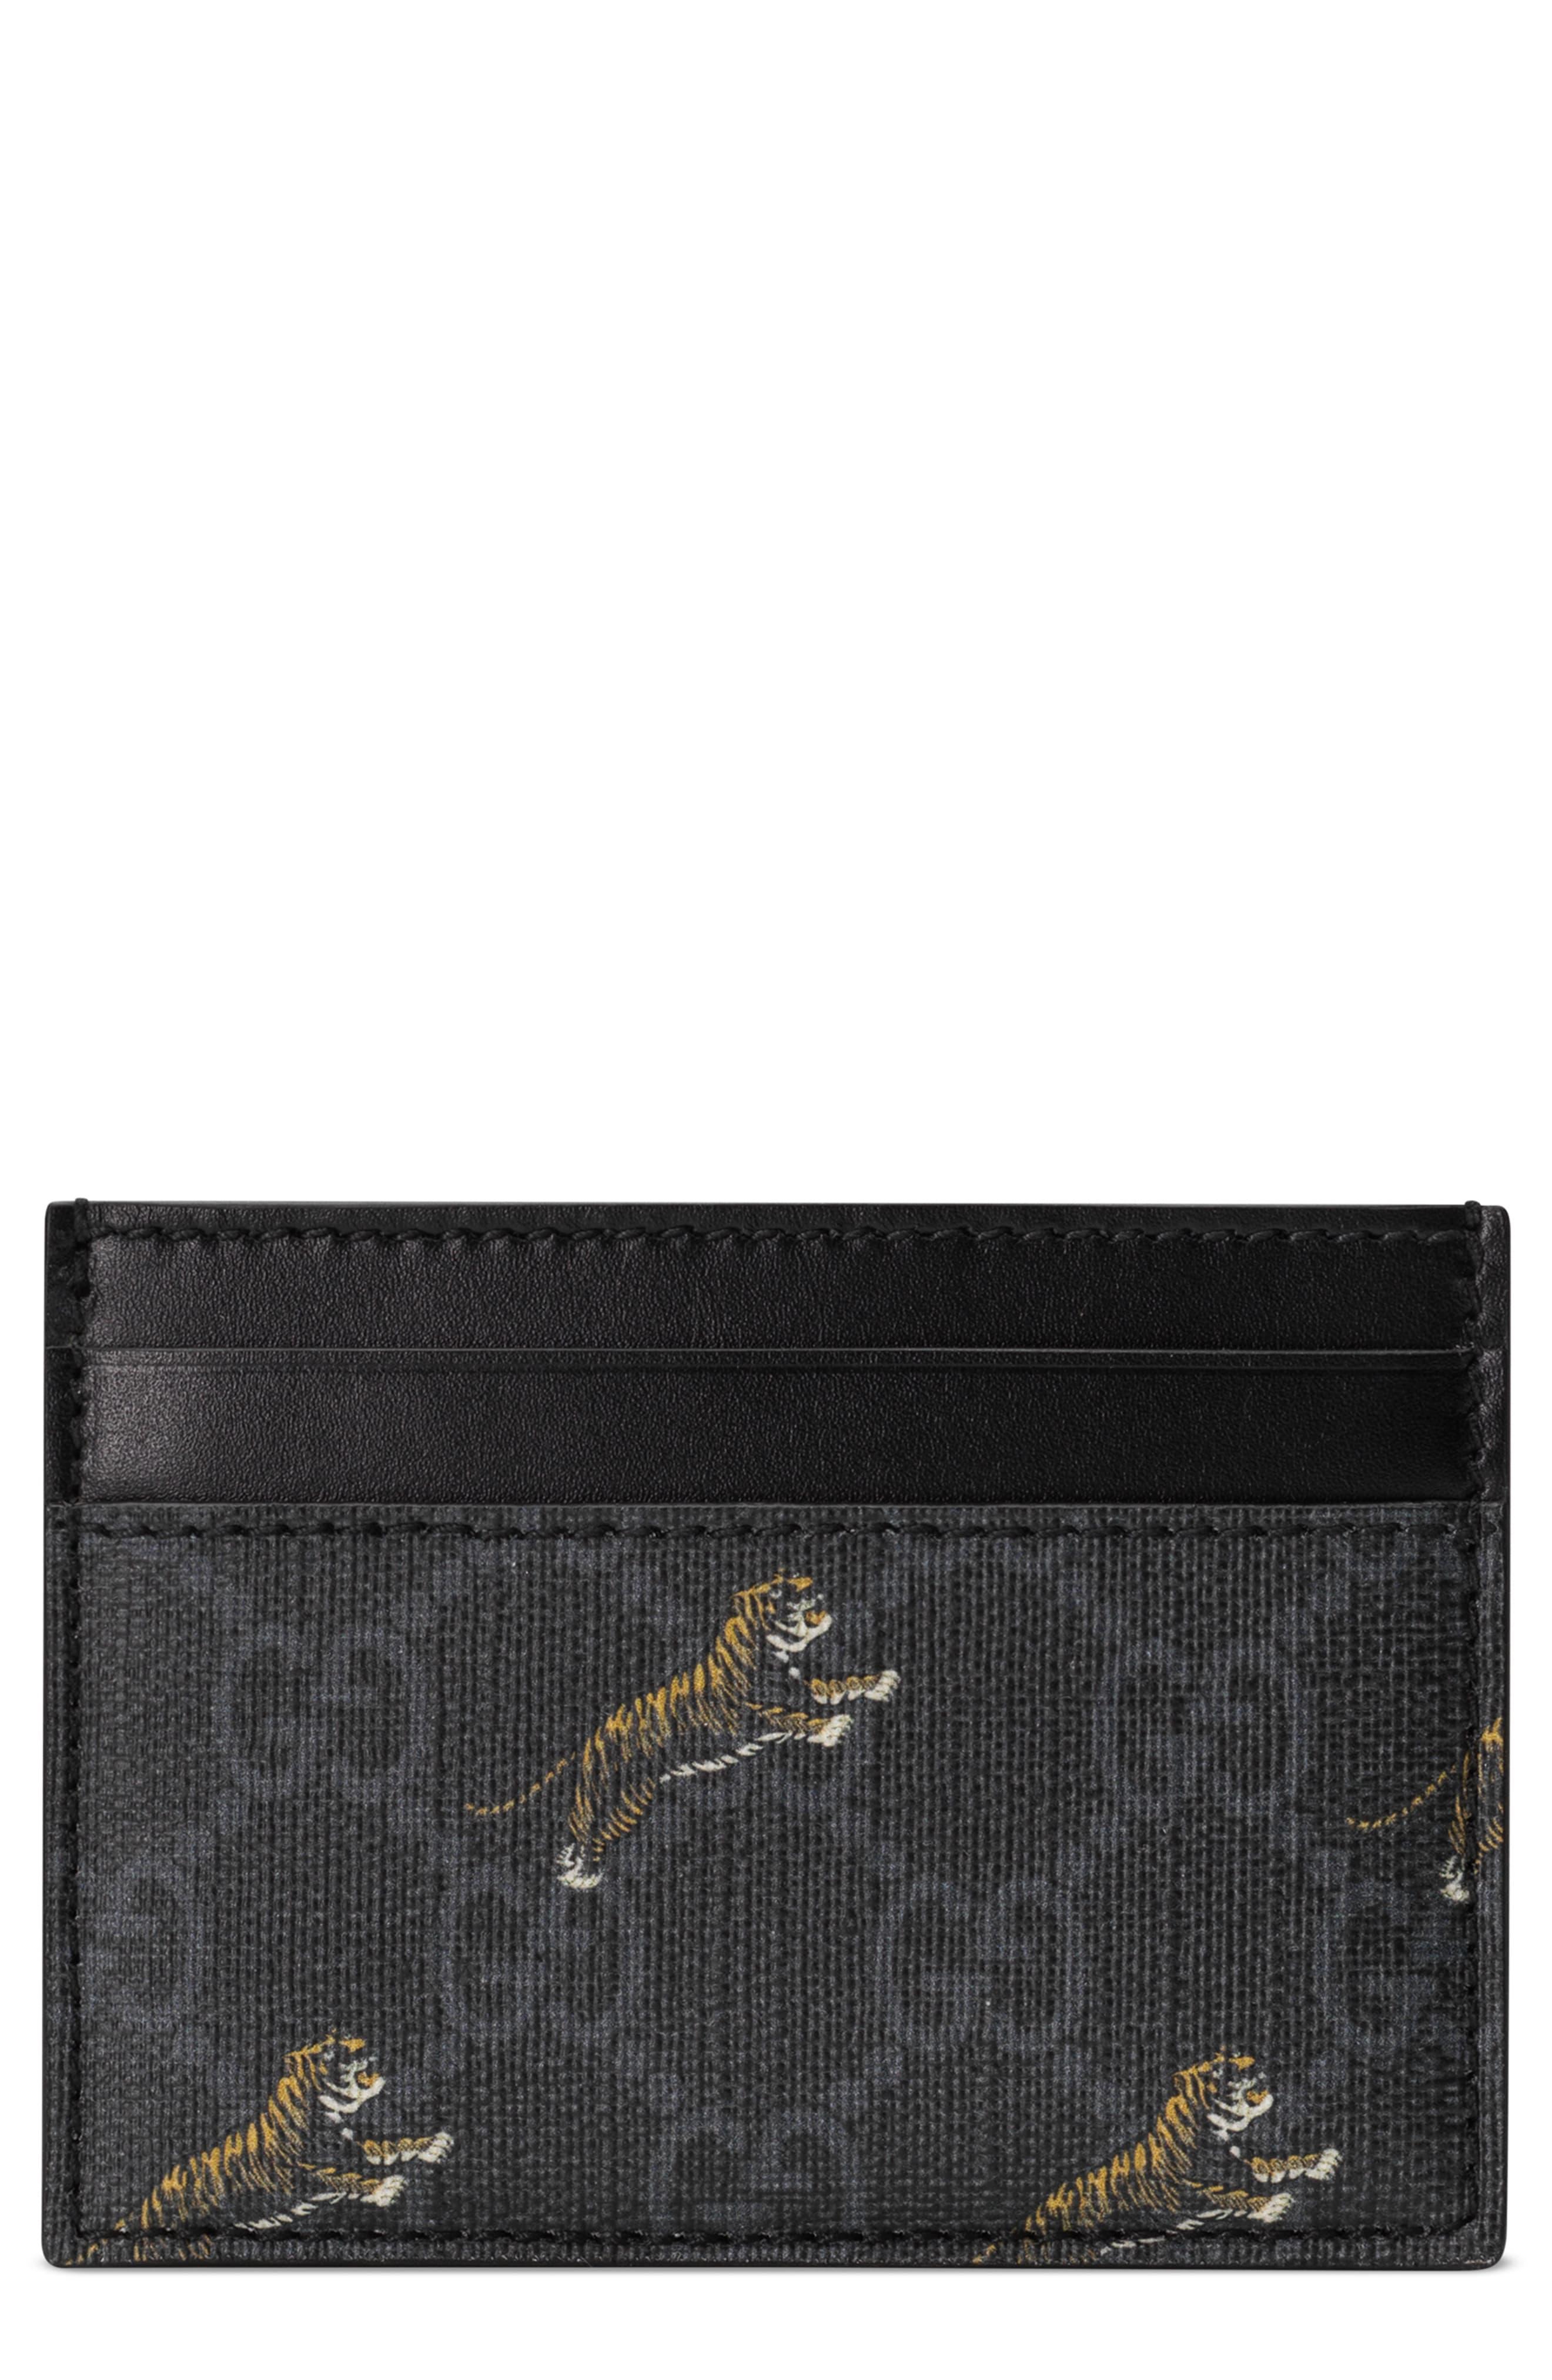 Card case with money clip in Black GG Canvas Leather